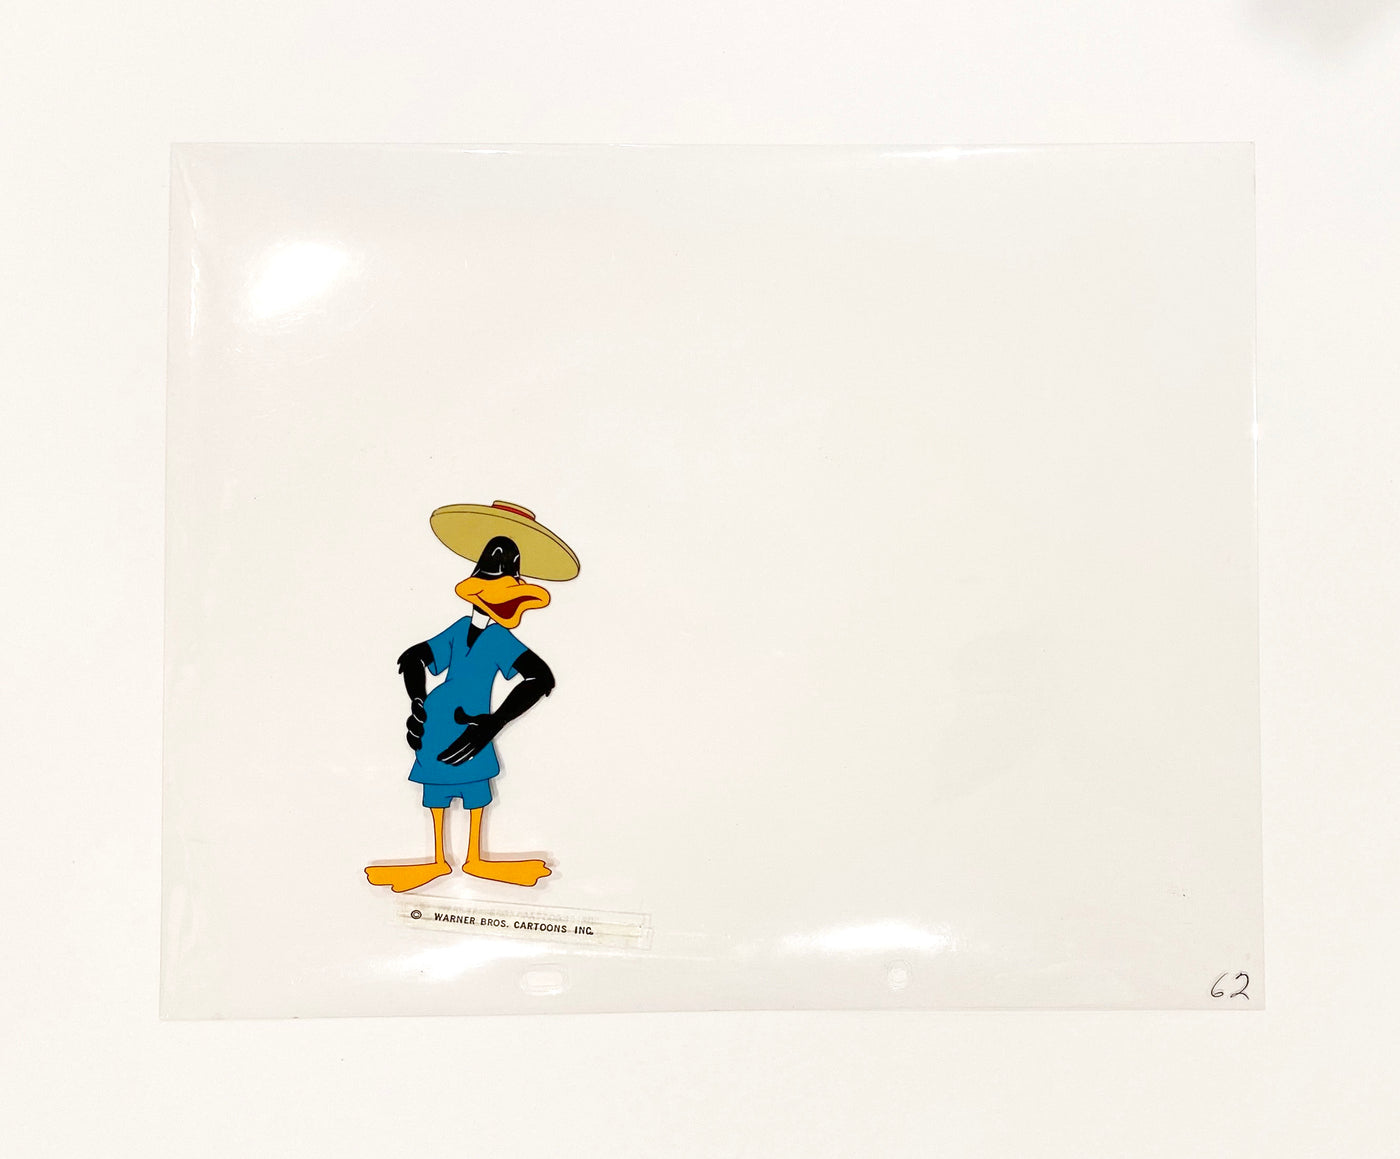 Original Warner Brothers Production Cel of Daffy Duck from Muscle Tussle (1953)